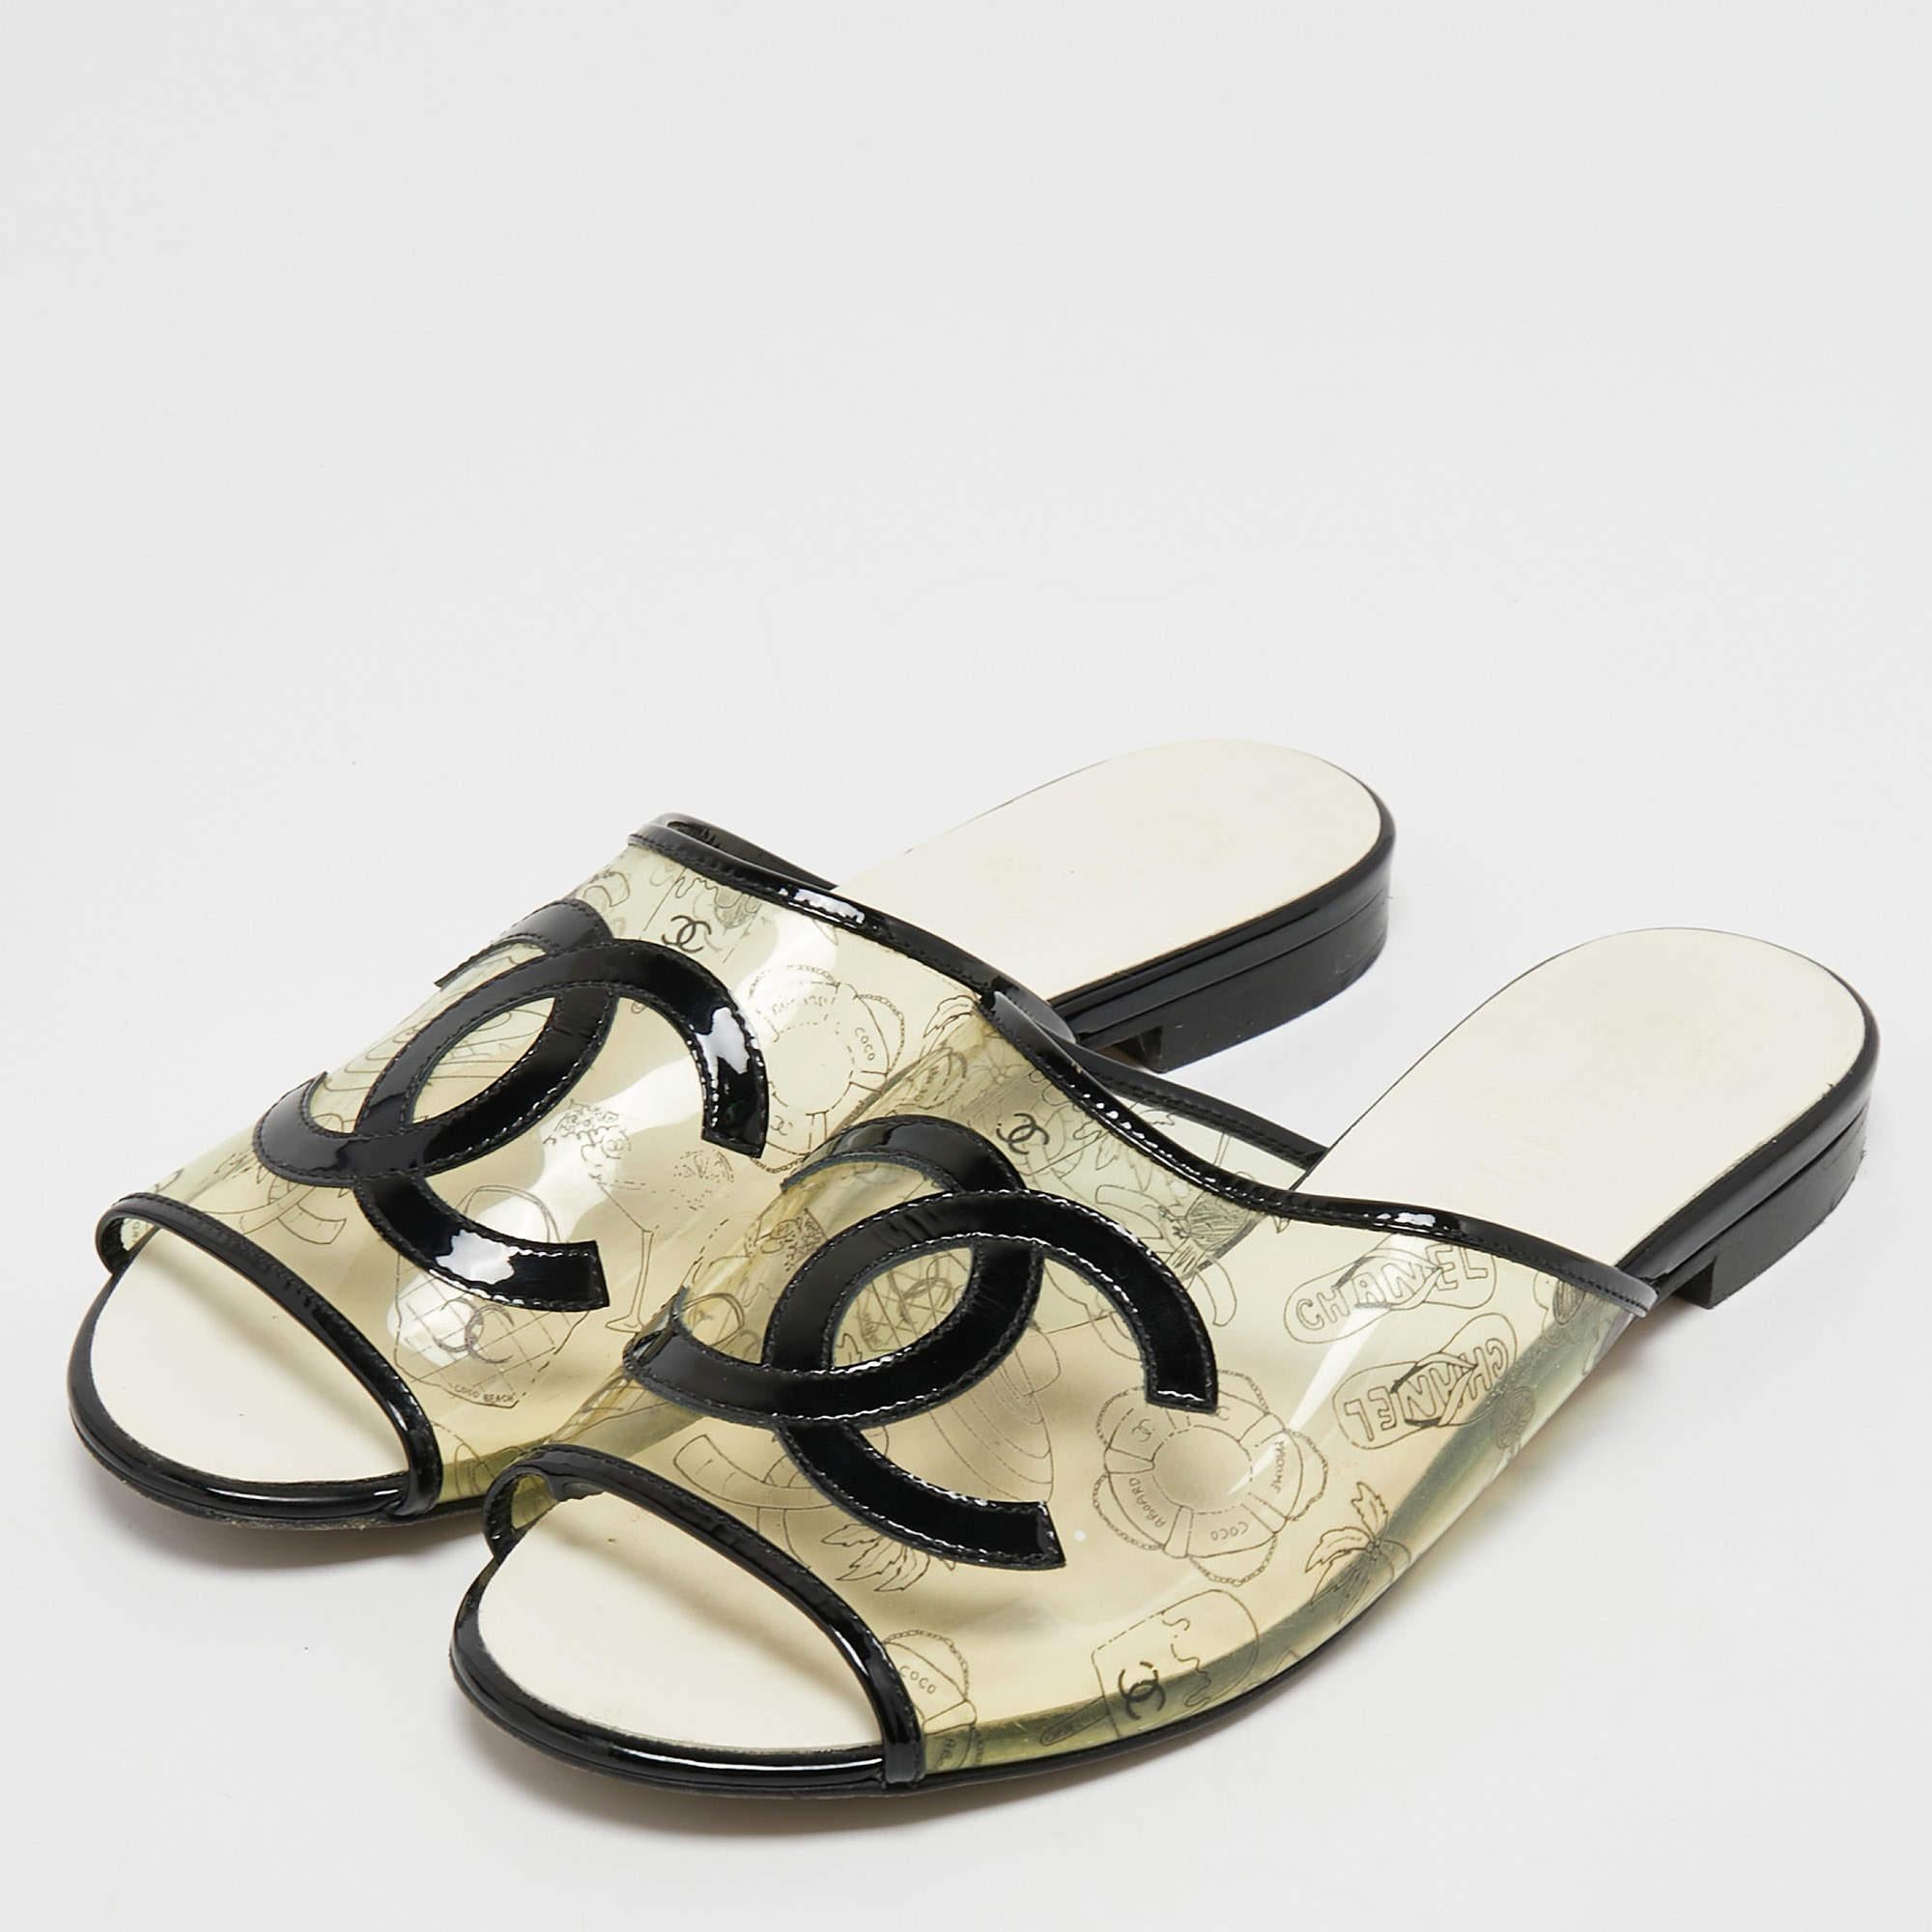 Crafted from patent leather & clear PVC, Chanel's slides are chic, comfortable, and versatile. They feature the CC logo on the uppers for a luxe finish.

